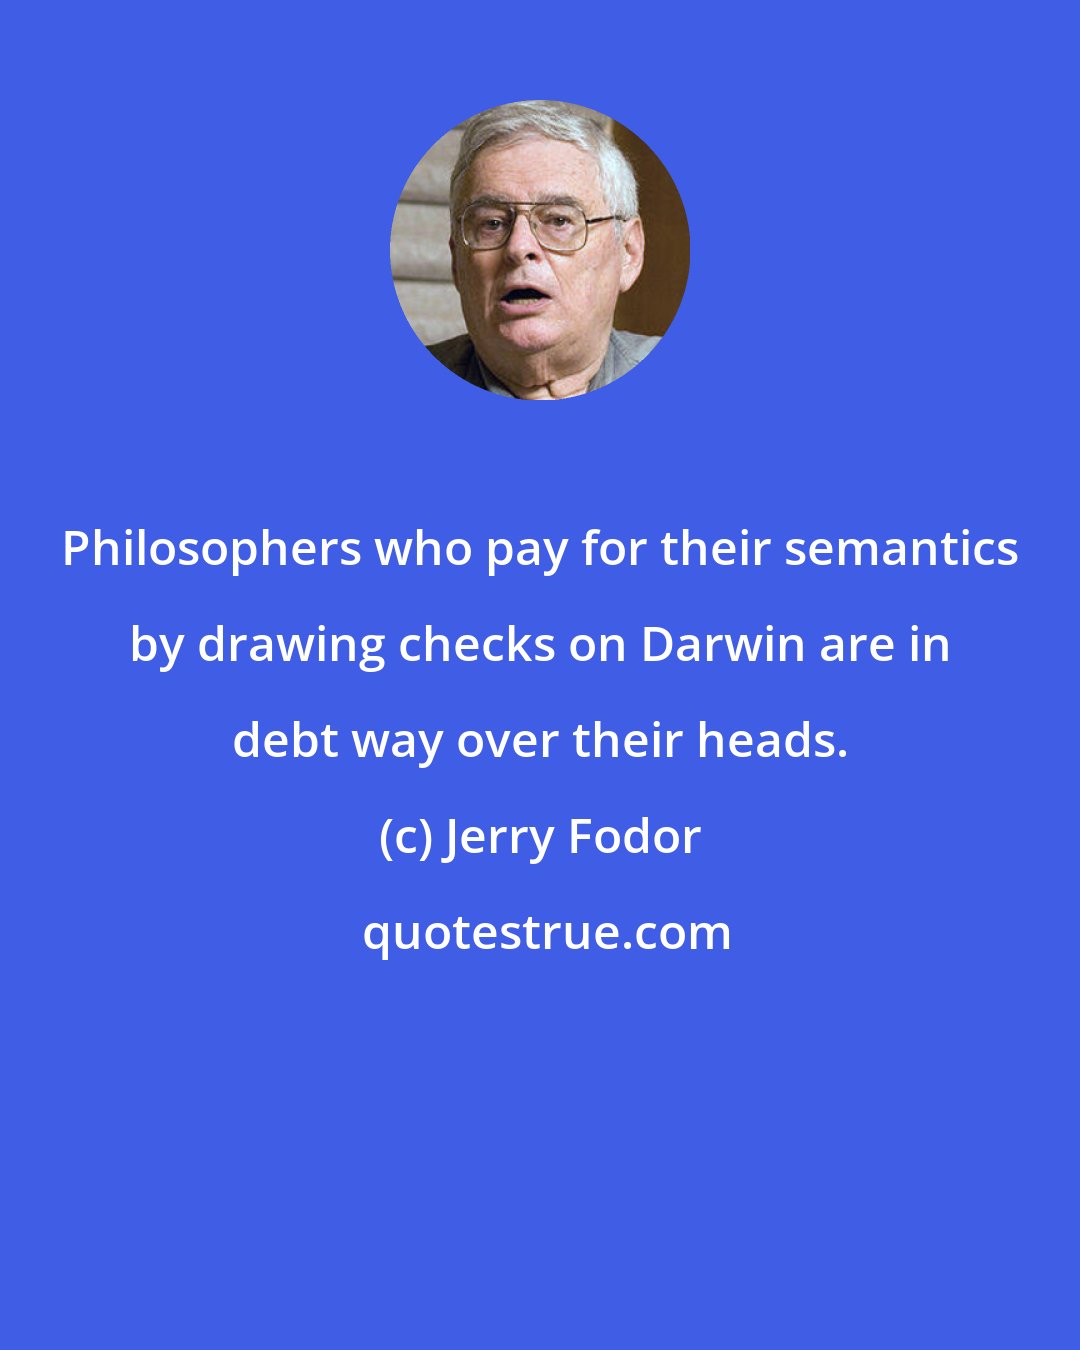 Jerry Fodor: Philosophers who pay for their semantics by drawing checks on Darwin are in debt way over their heads.